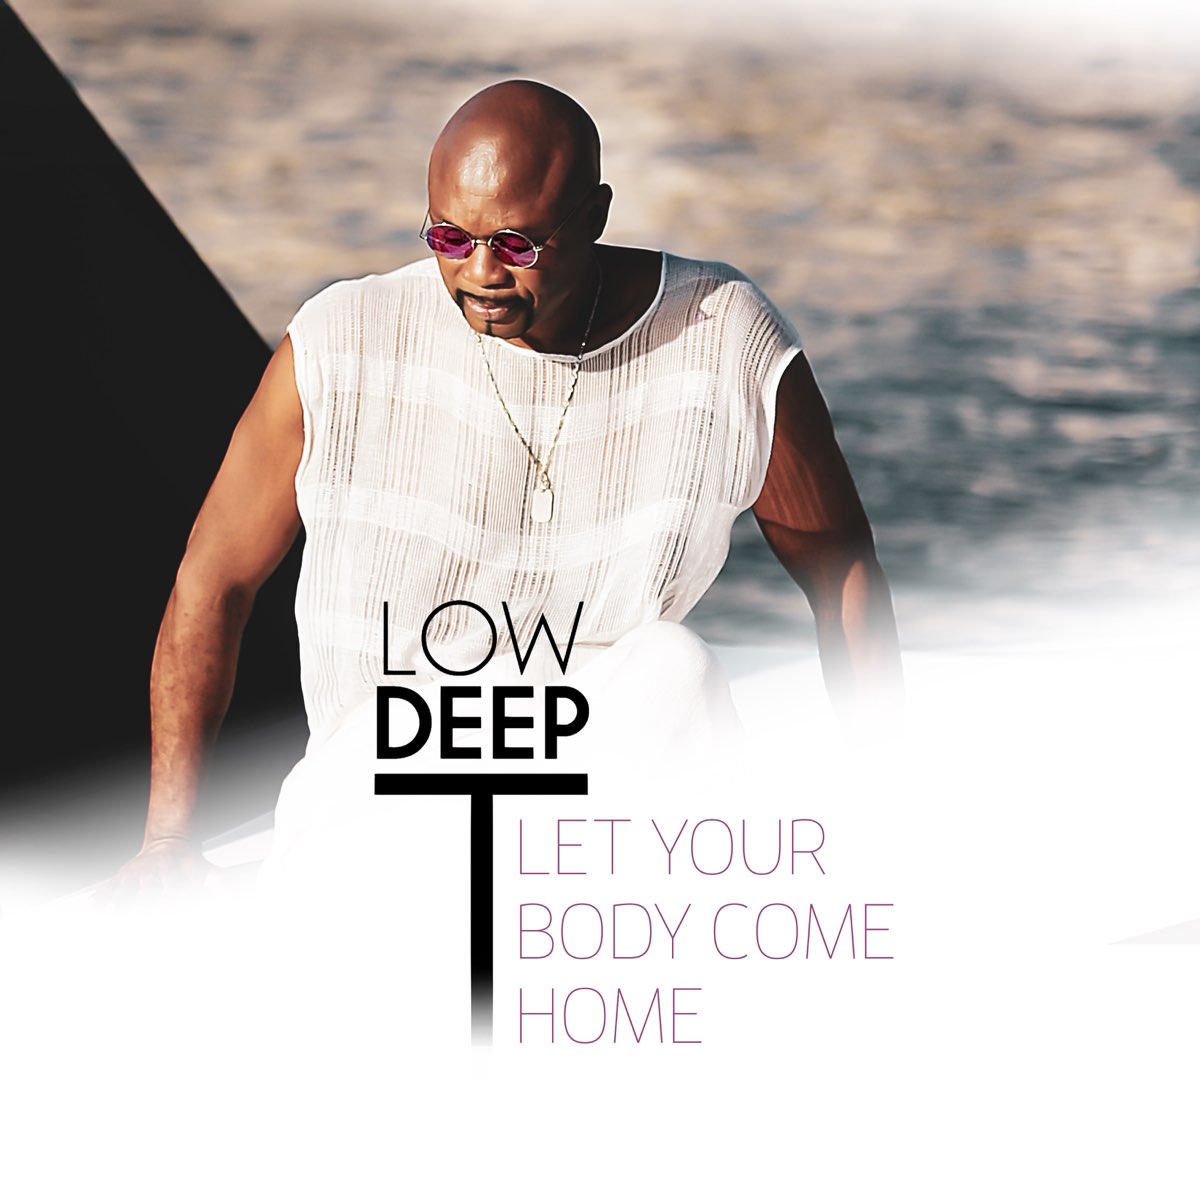 Let Your Body Come Home (Remixes) - Single by Low Deep T on Apple Music.